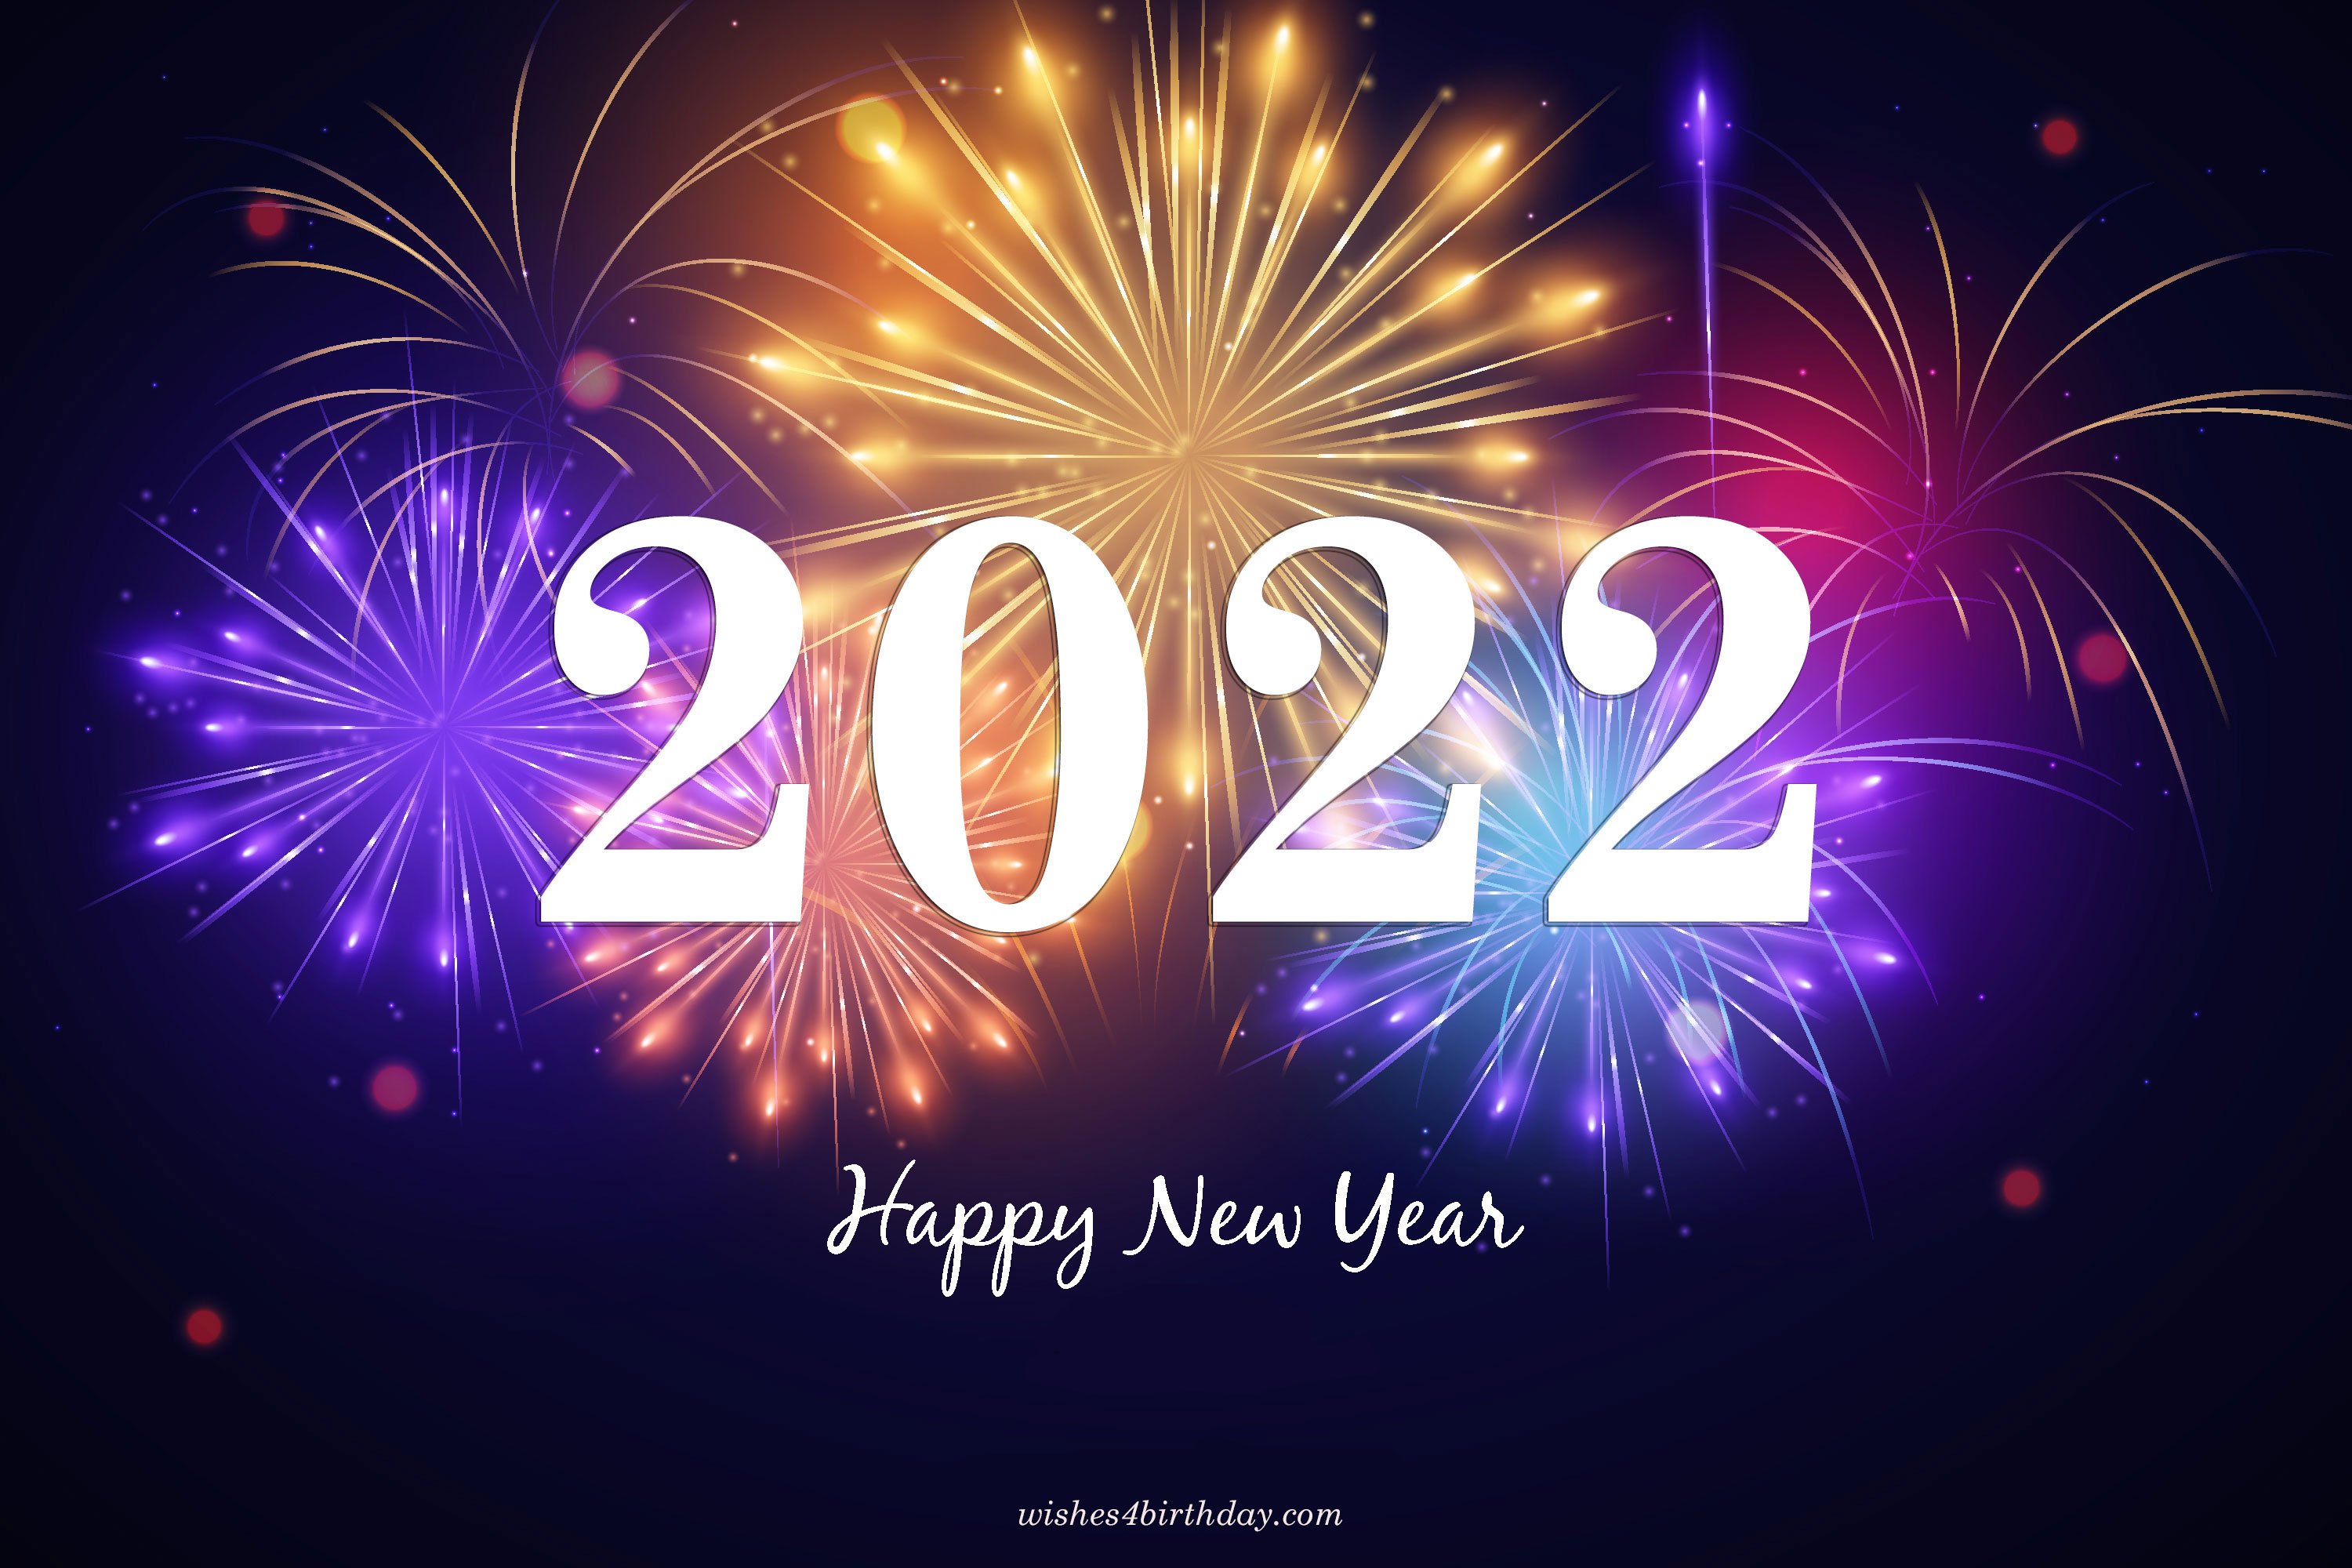 Happy New Year Images 2022